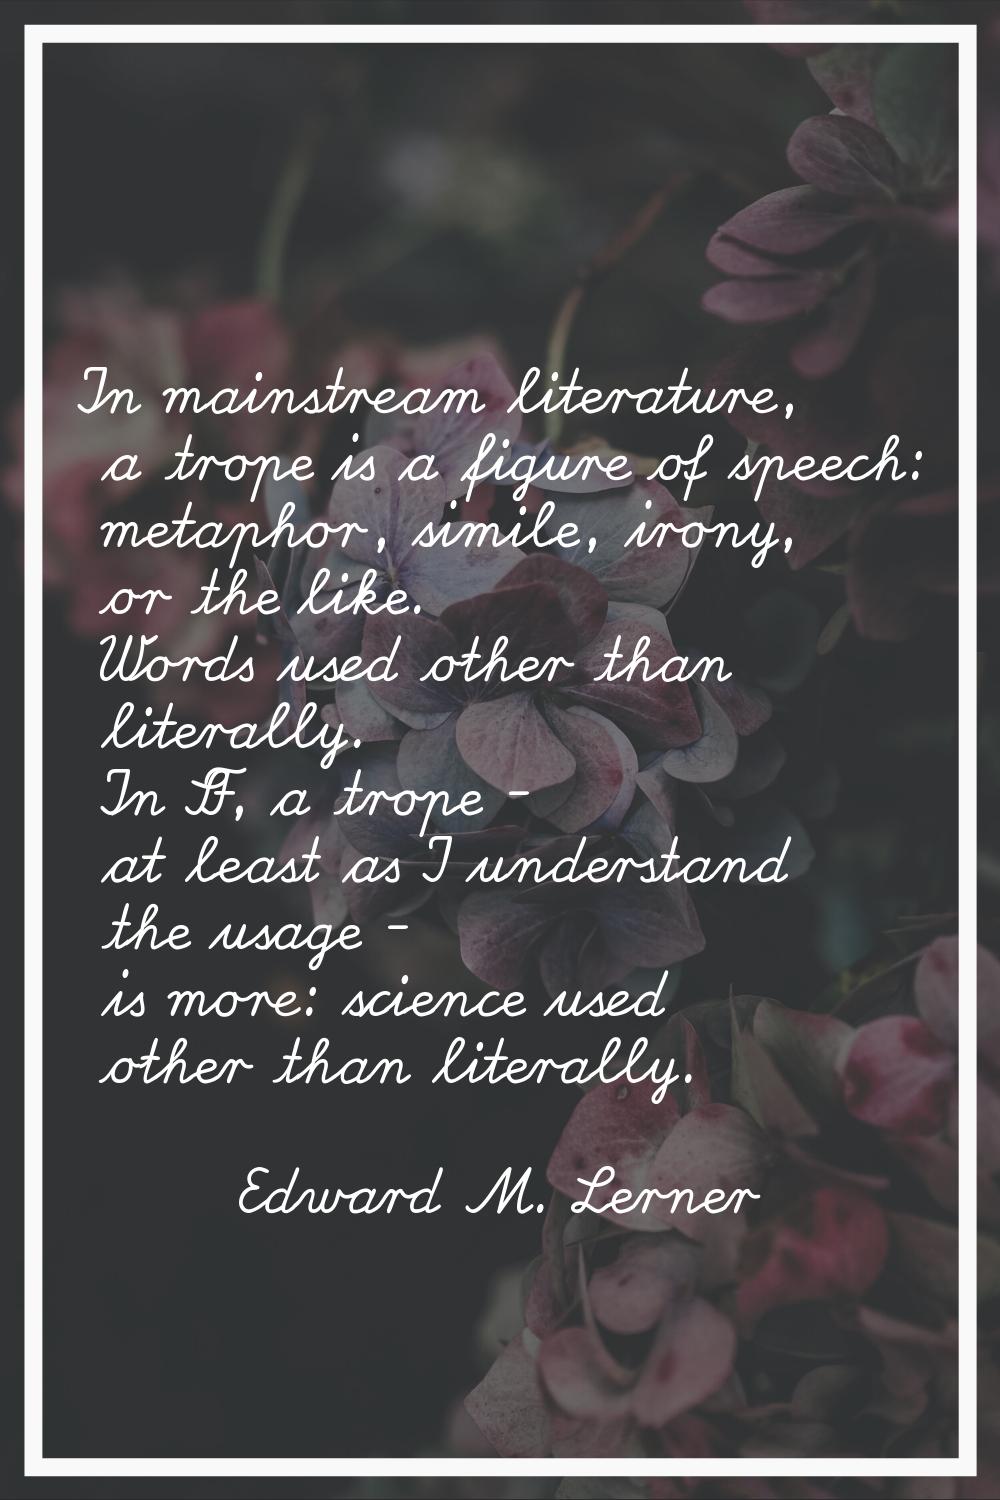 In mainstream literature, a trope is a figure of speech: metaphor, simile, irony, or the like. Word